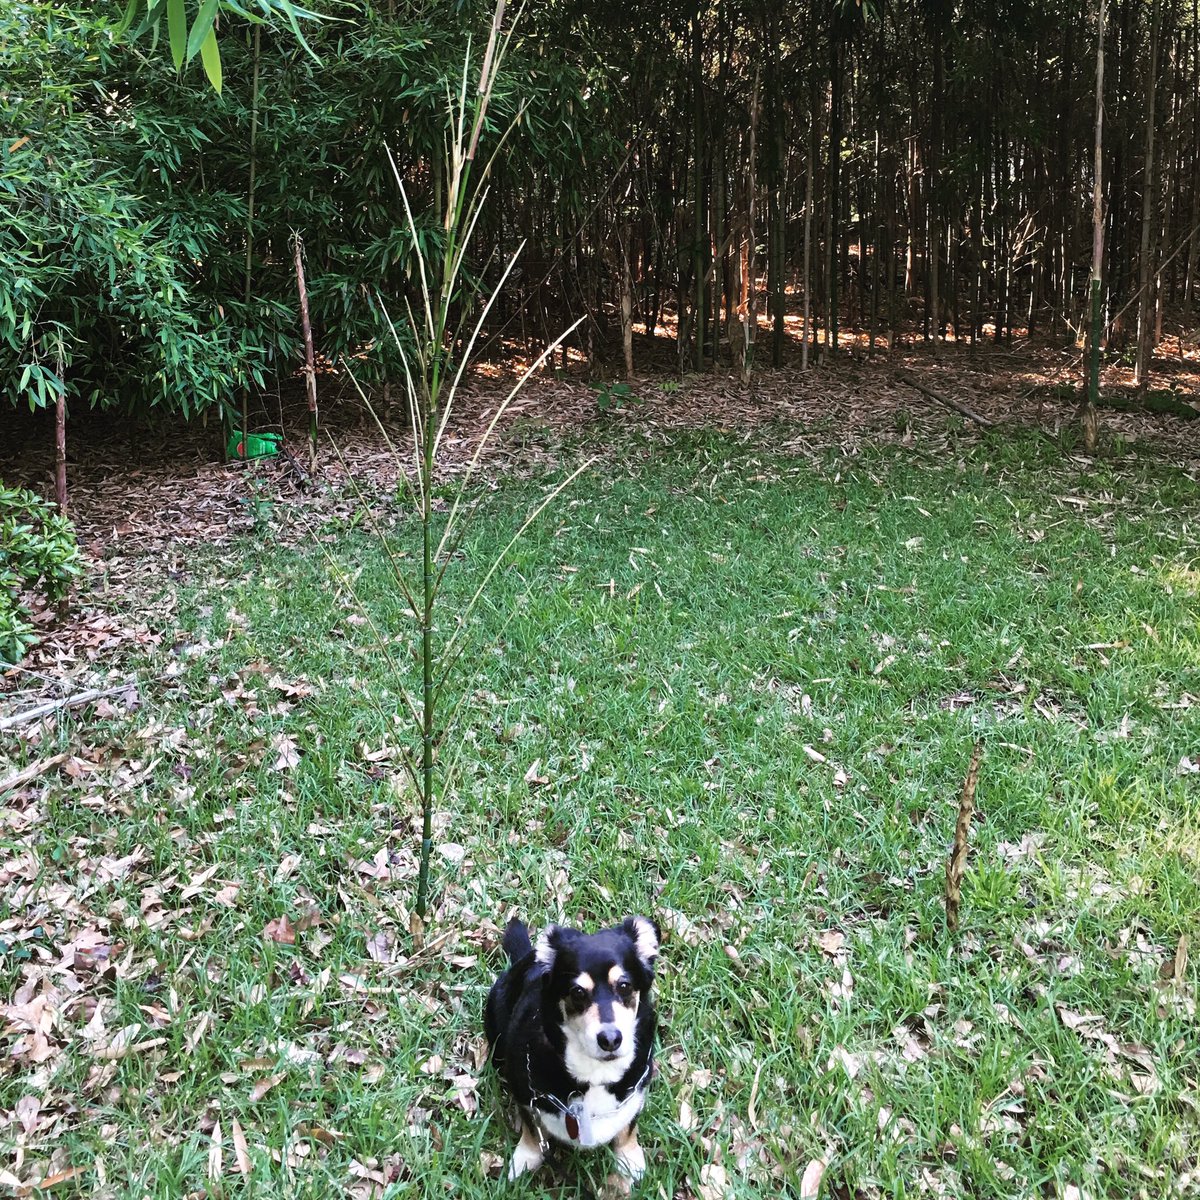 Bamboo not visible less than 2 weeks ago--to this! #littleredcottageinthewoods #bambooforest #corgiadventures  #MissCookie